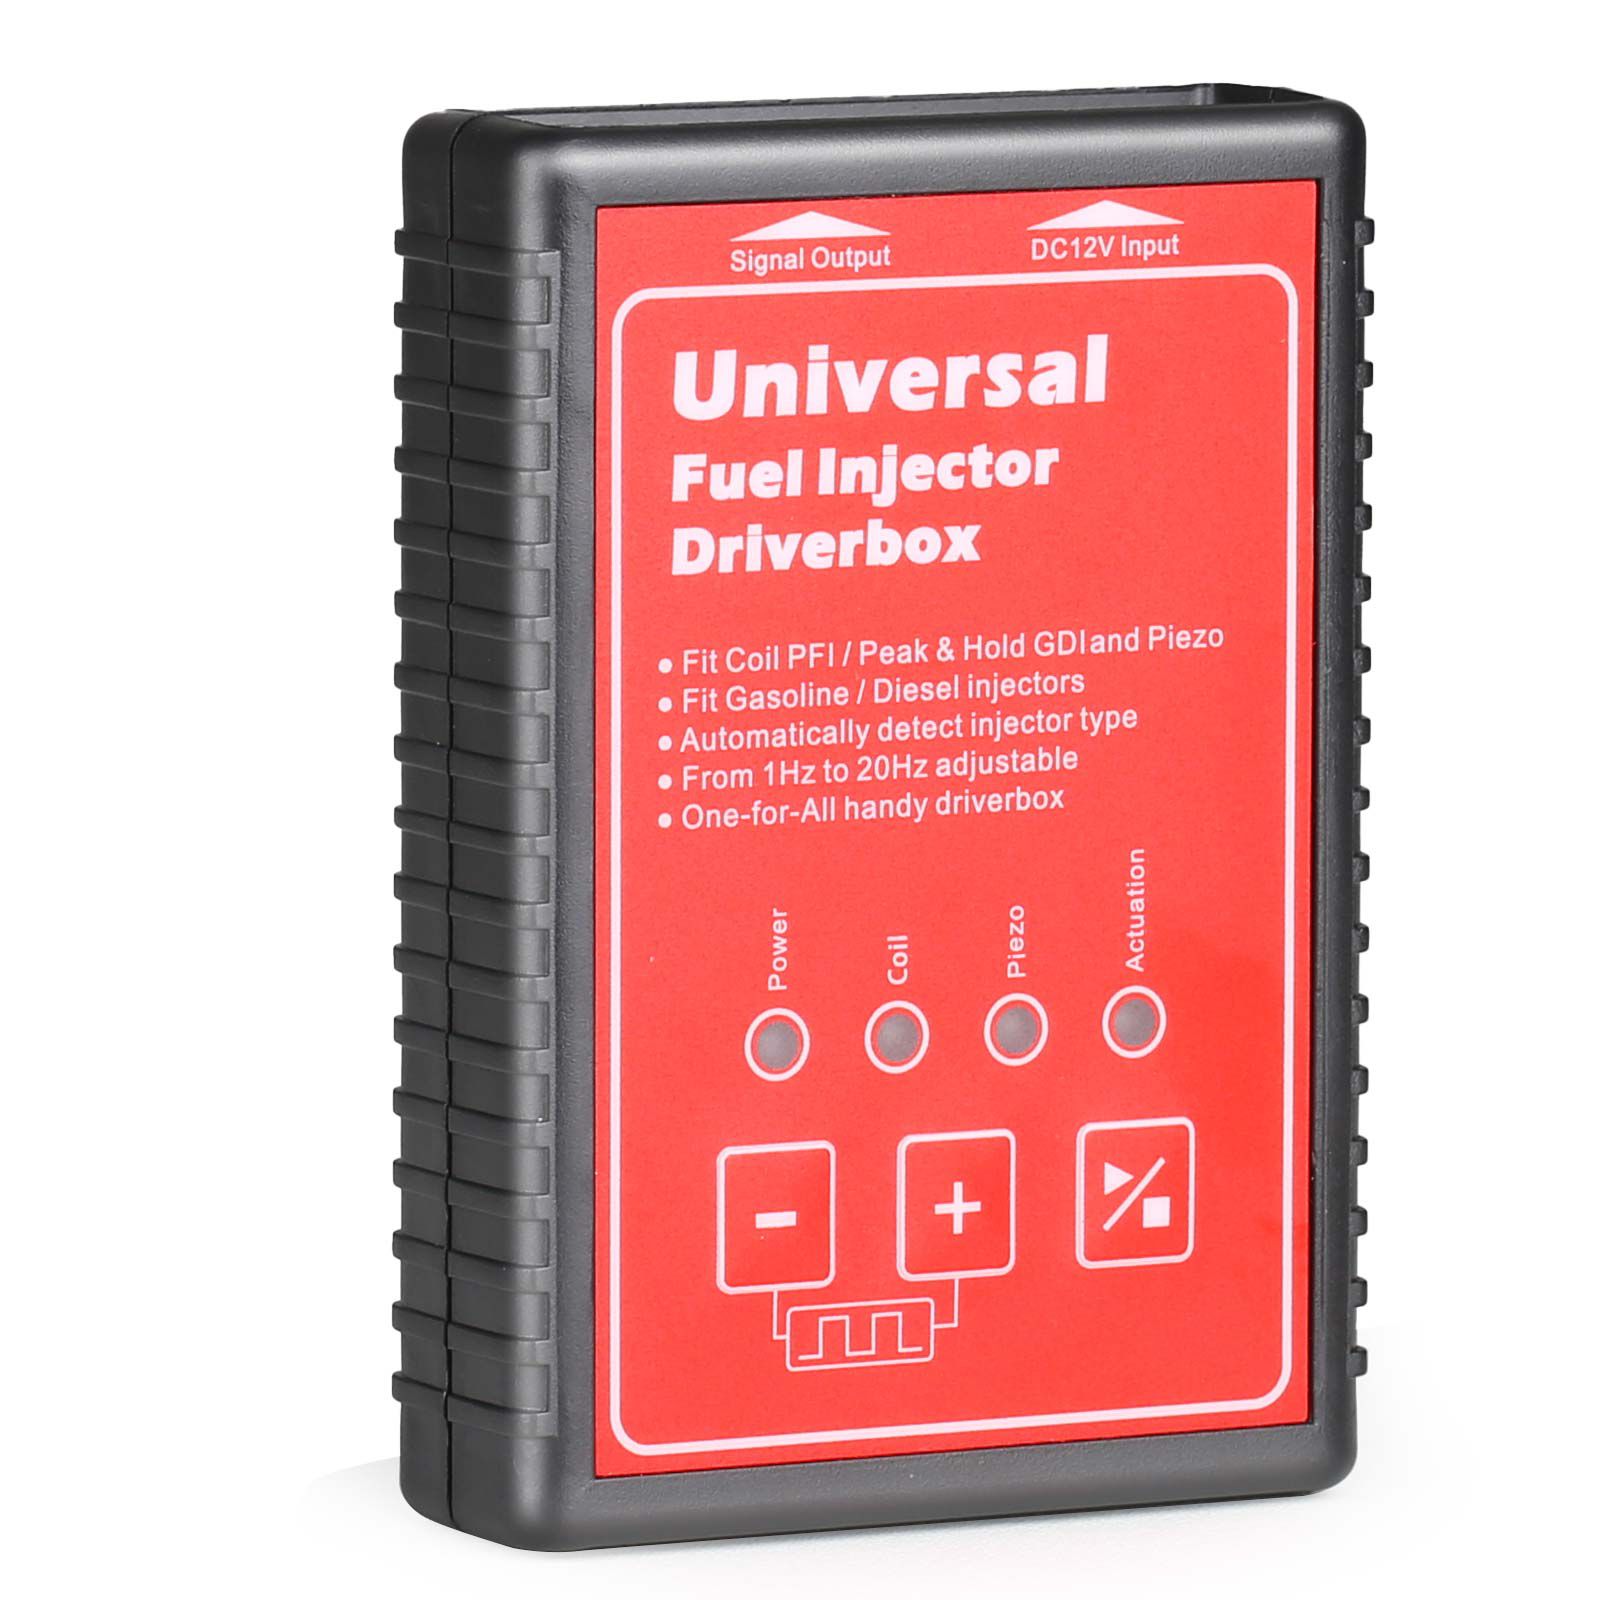 GD1 Universal Fuel Injector Drivebox Fit All Kinds of Injector Interface Automatically Detect Injector Type